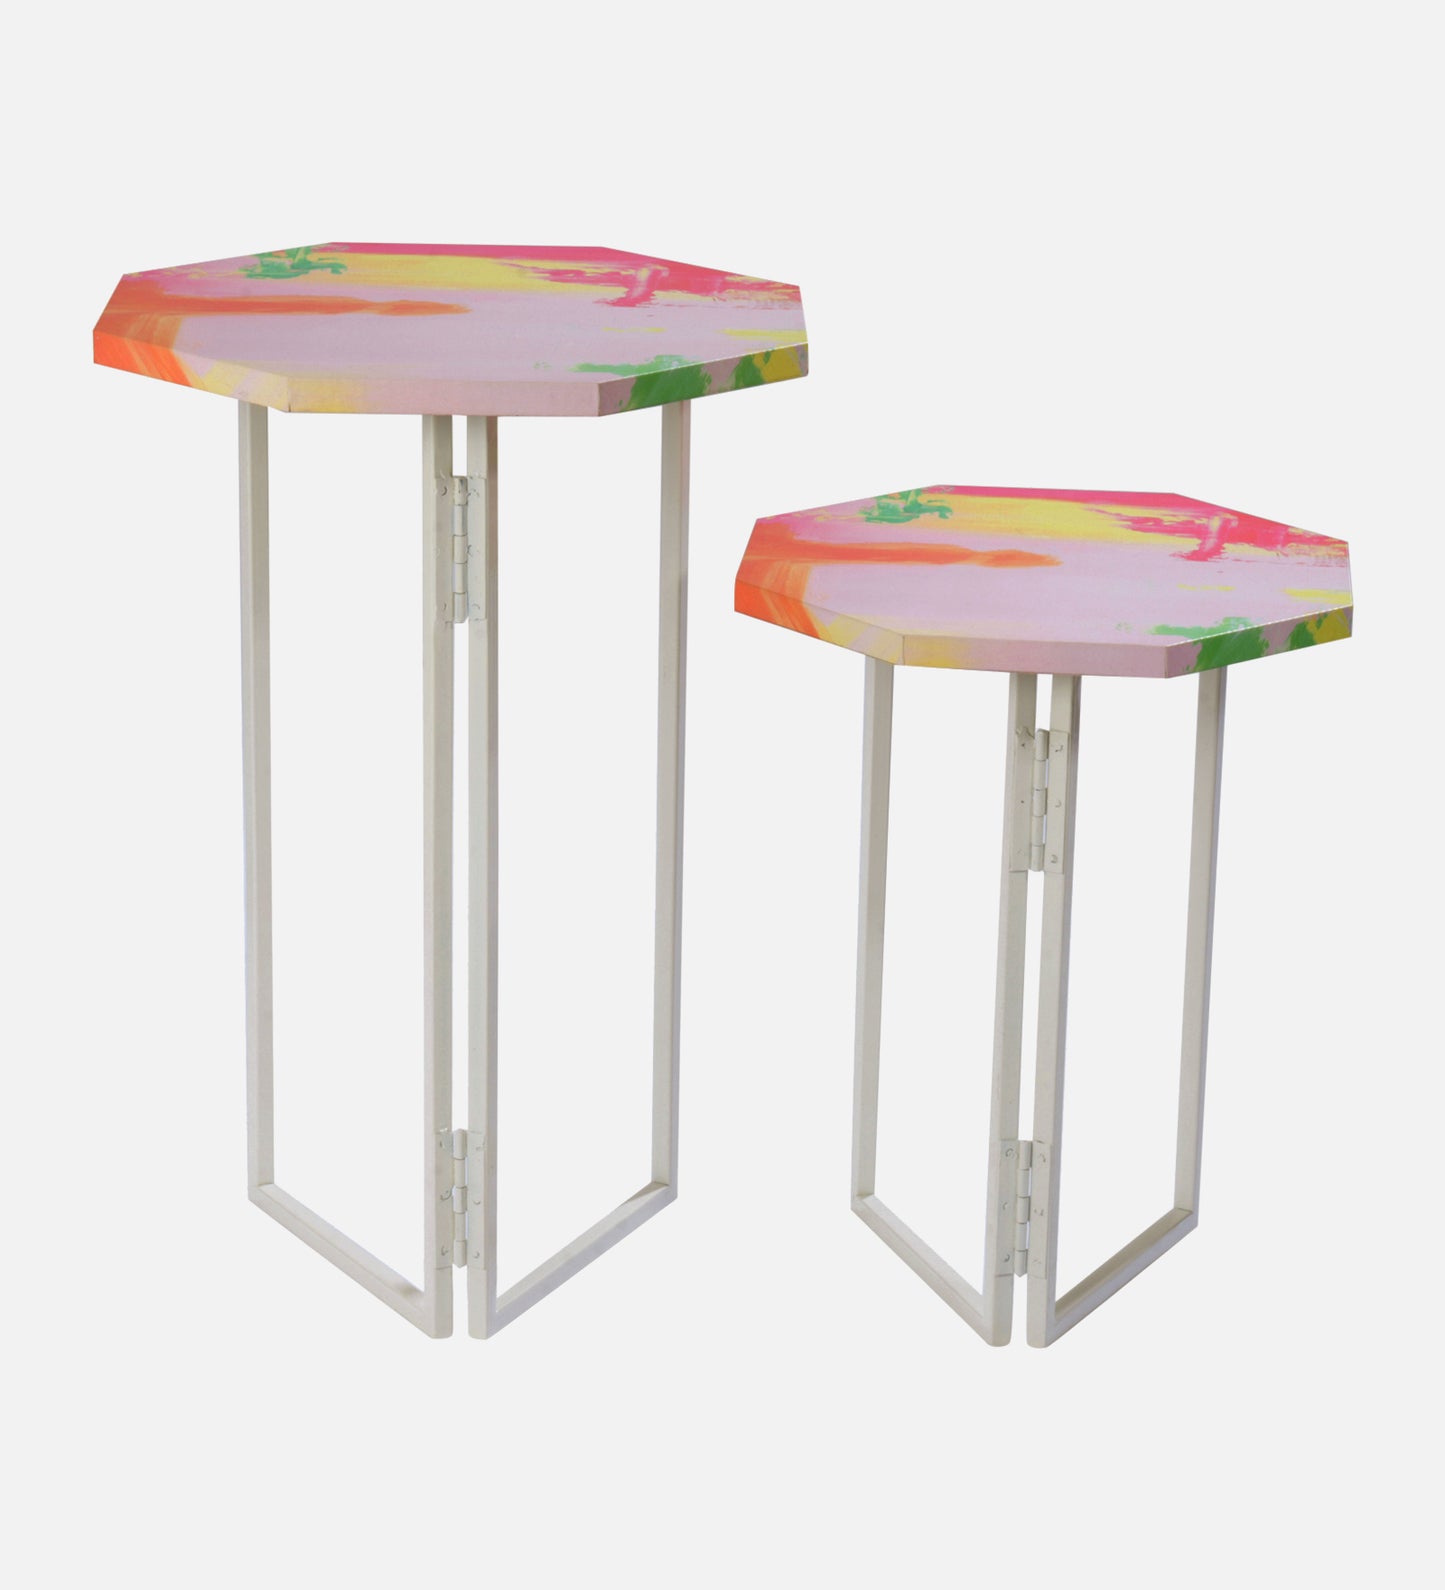 Neon Octagon Oblique Nesting Tables, Side Tables, Wooden Tables, Living Room Decor by A Tiny Mistake